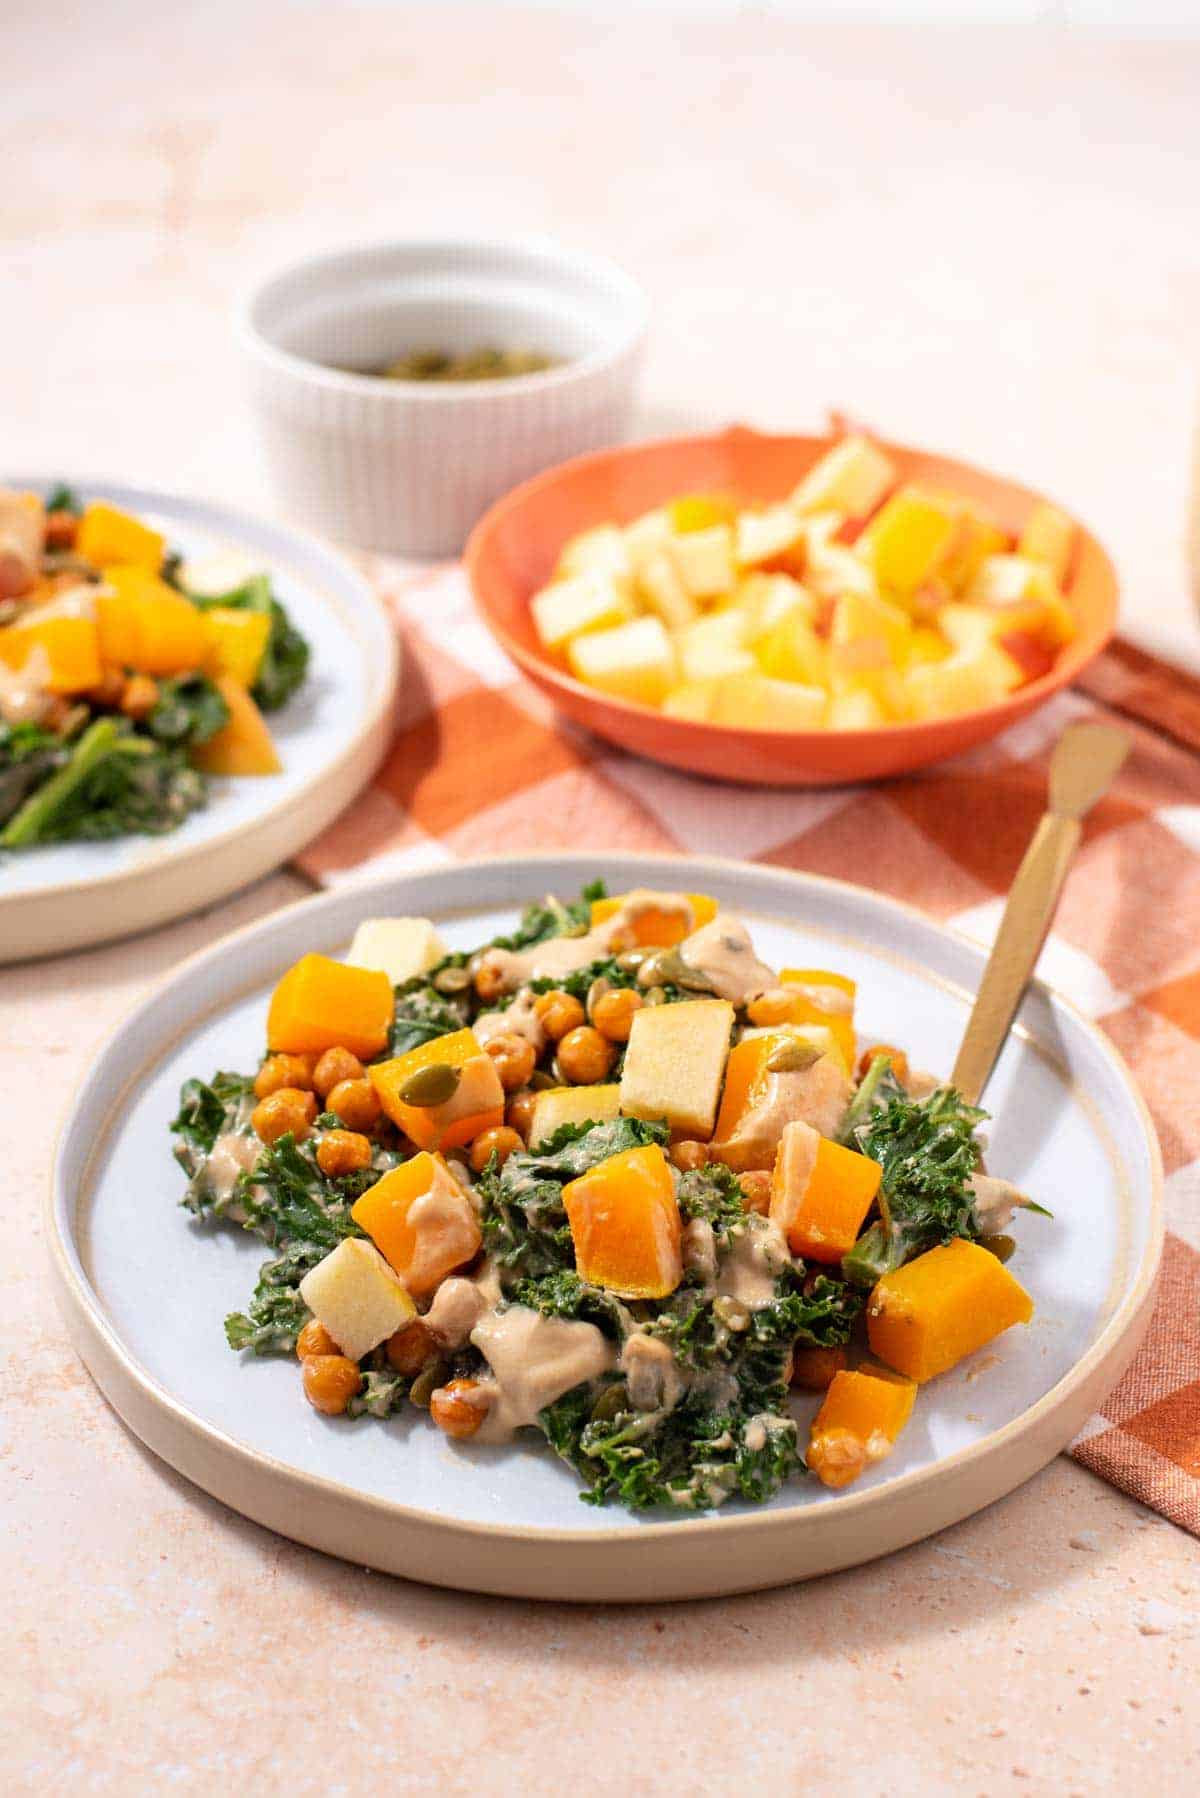 A photo of a butternut squash and kale salad on a white plate.